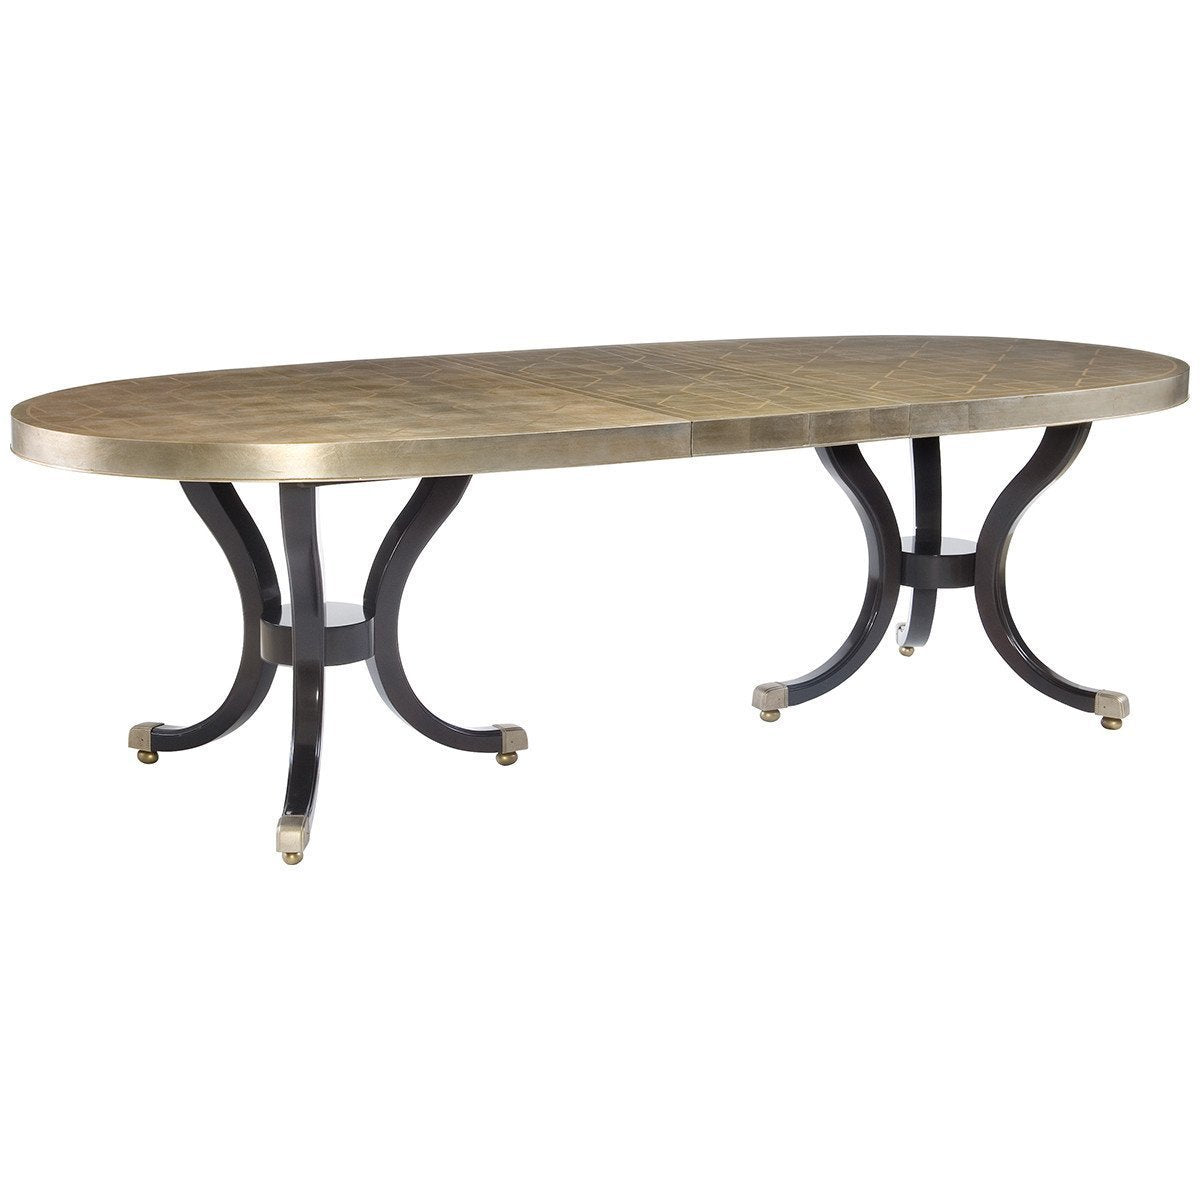 Caracole Classic Draw Attention Dining Table